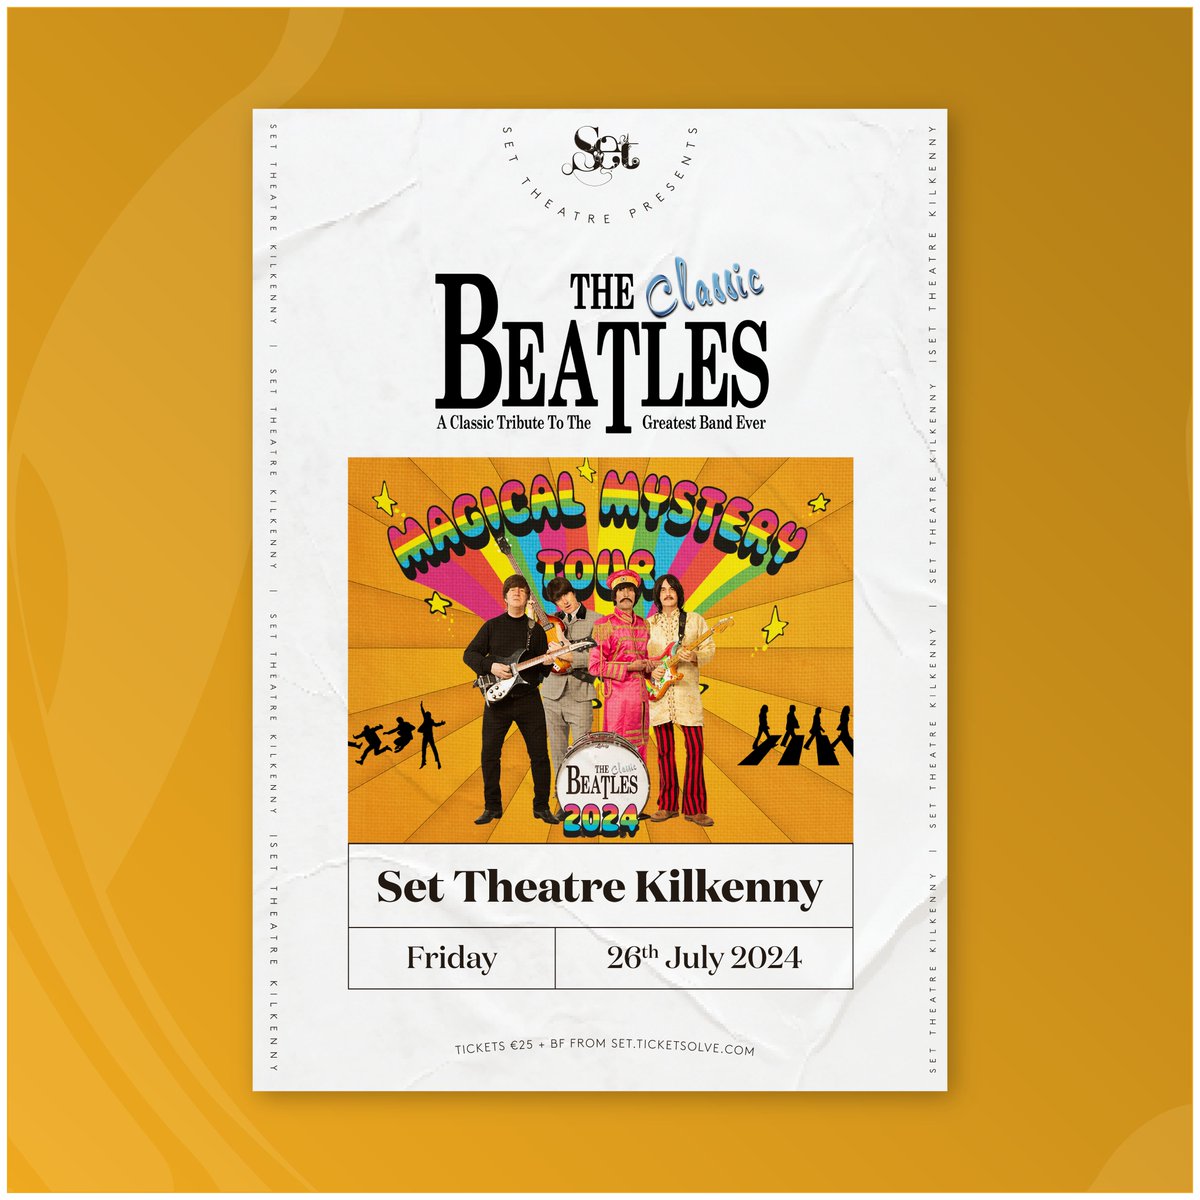 𝗦𝗛𝗢𝗪 𝗔𝗡𝗡𝗢𝗨𝗡𝗖𝗘𝗠𝗘𝗡𝗧 / 𝗢𝗡 𝗦𝗔𝗟𝗘 𝗡𝗢𝗪 The Classic Beatles Friday 26 July Set Theatre Kilkenny Tickets set.ticketsolve.com/shows/11736551… Fan favourites in the set include: Nowhere Man, Tomorrow Never Knows, A Day In The Life and loads more incredible songs